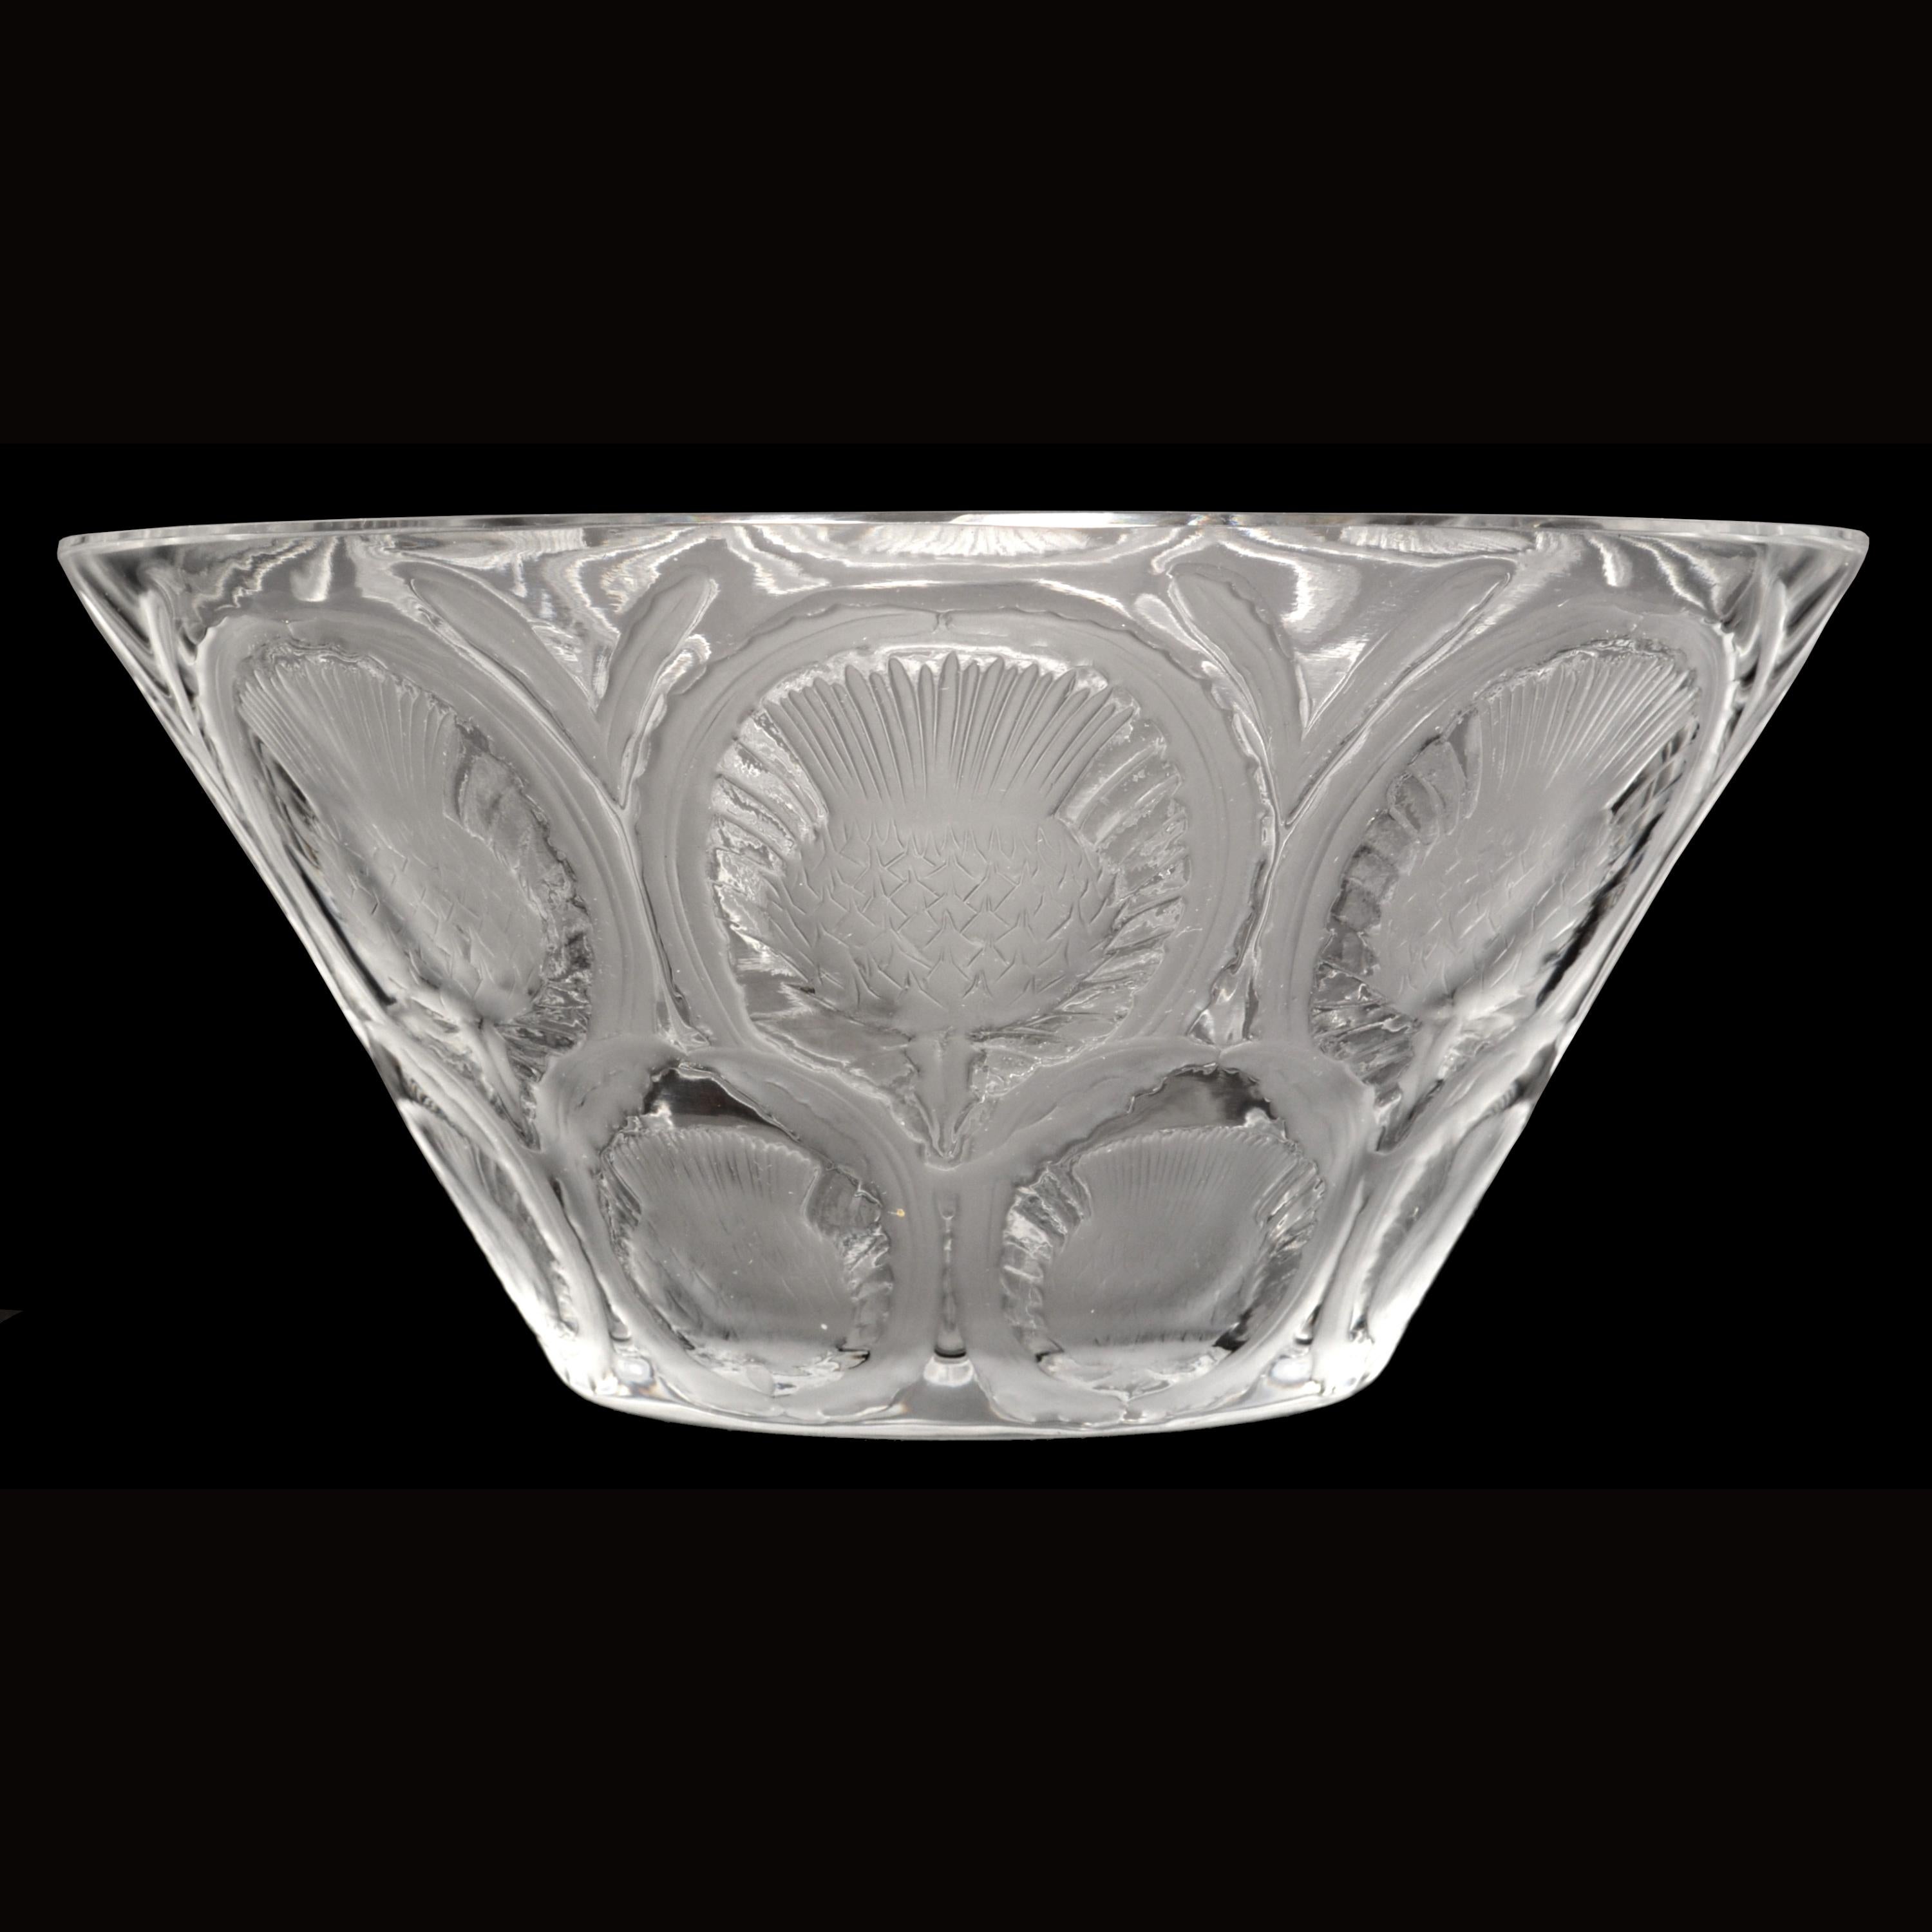 A good 1930's Art Deco Lalique crystal glass center bowl, in the Chardons (thistle) pattern, having alternating and repeated patterns of both frosted and clear glass with embossed images of thistles. The bowl having the 